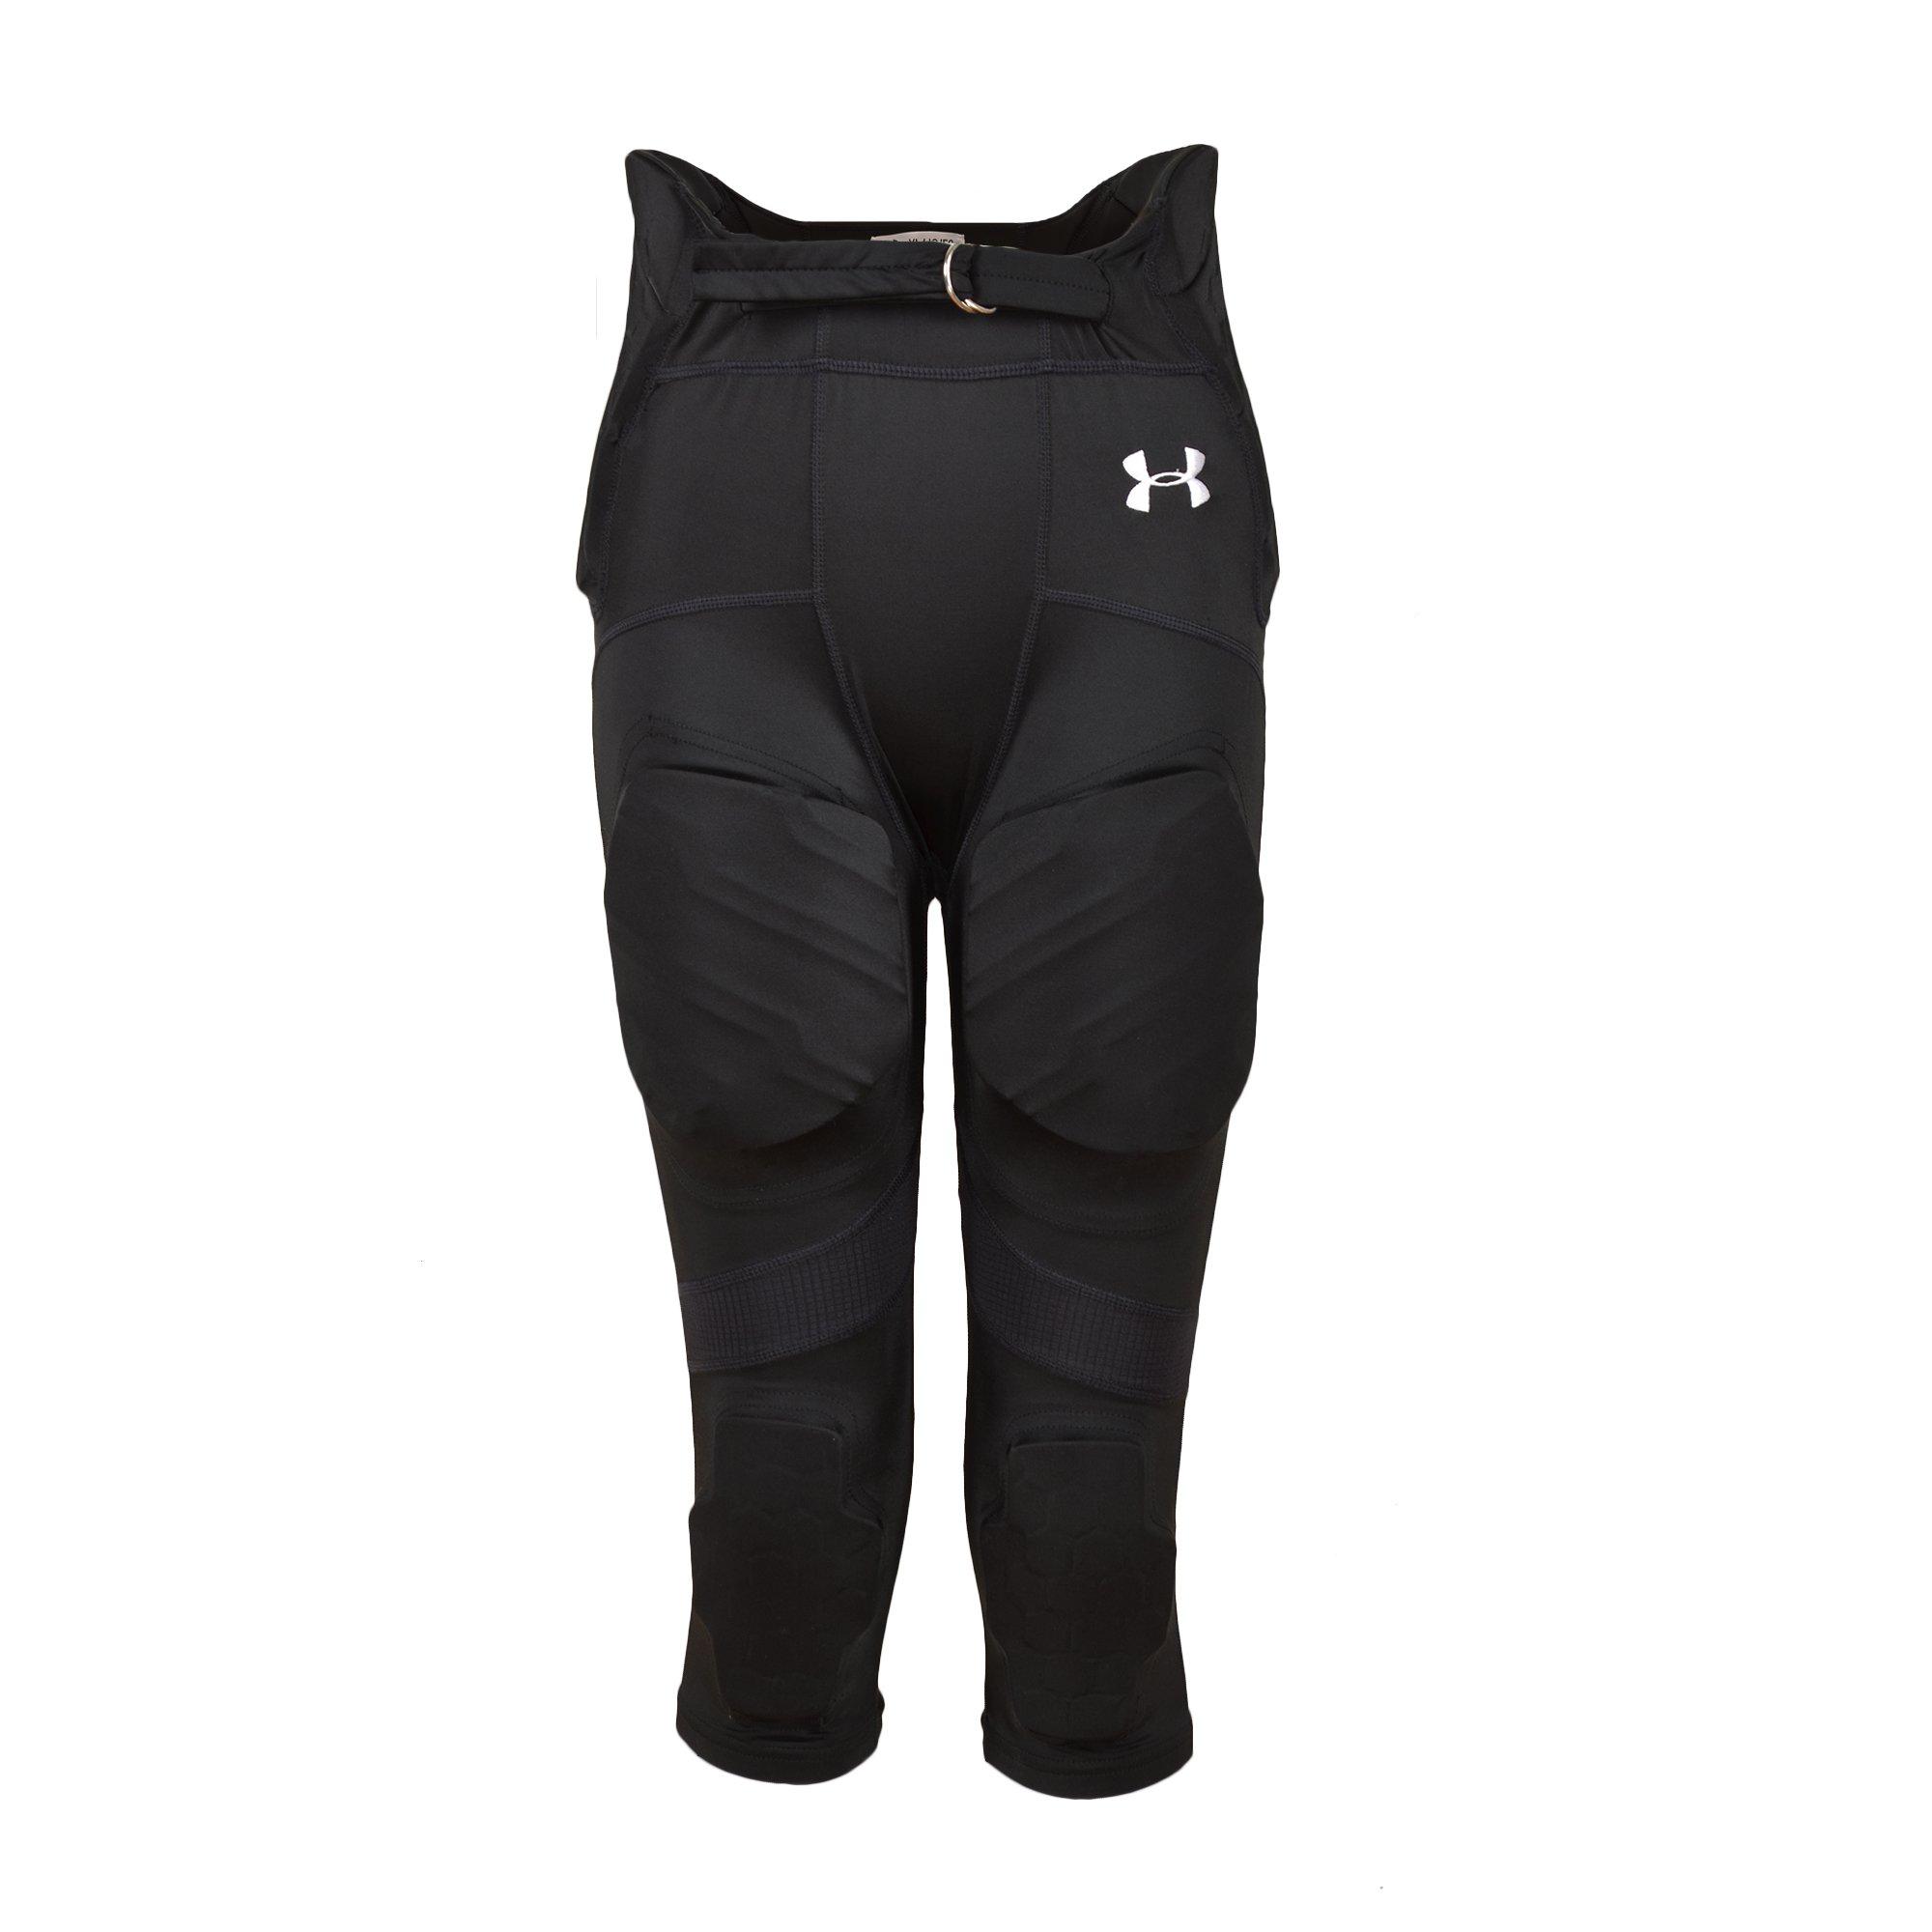 Under Armour, Bottoms, Nwt Under Armour Cropped Leggings Girls Xl